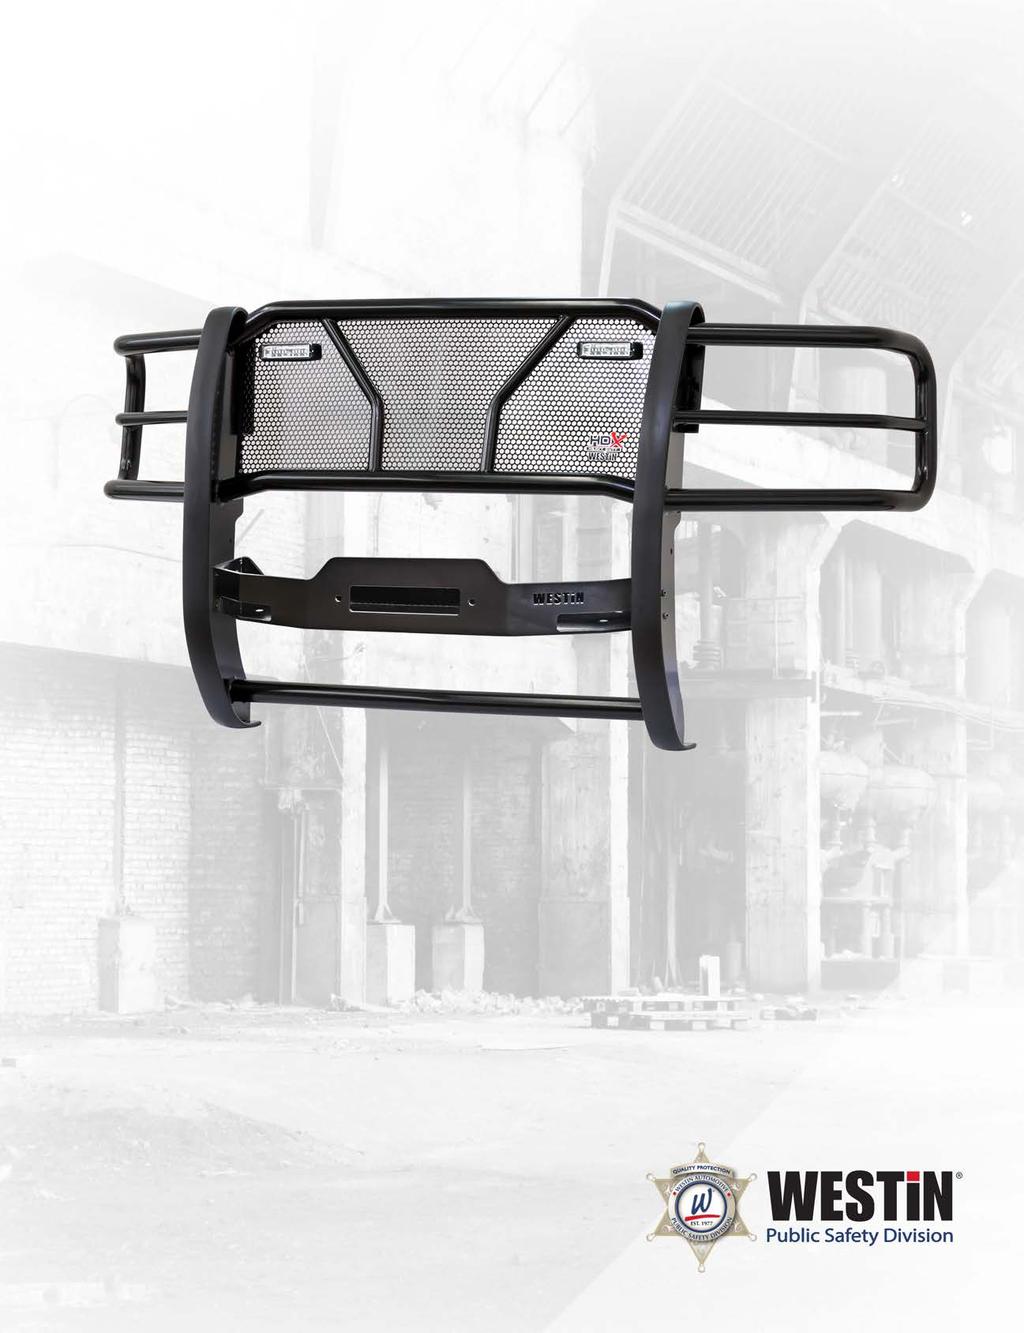 HDX WINCH MOUNT GRILLE GUARD Westin s HDX Winch Mount Grille Guard attaches directly to the vehicles frame for maximum strength.